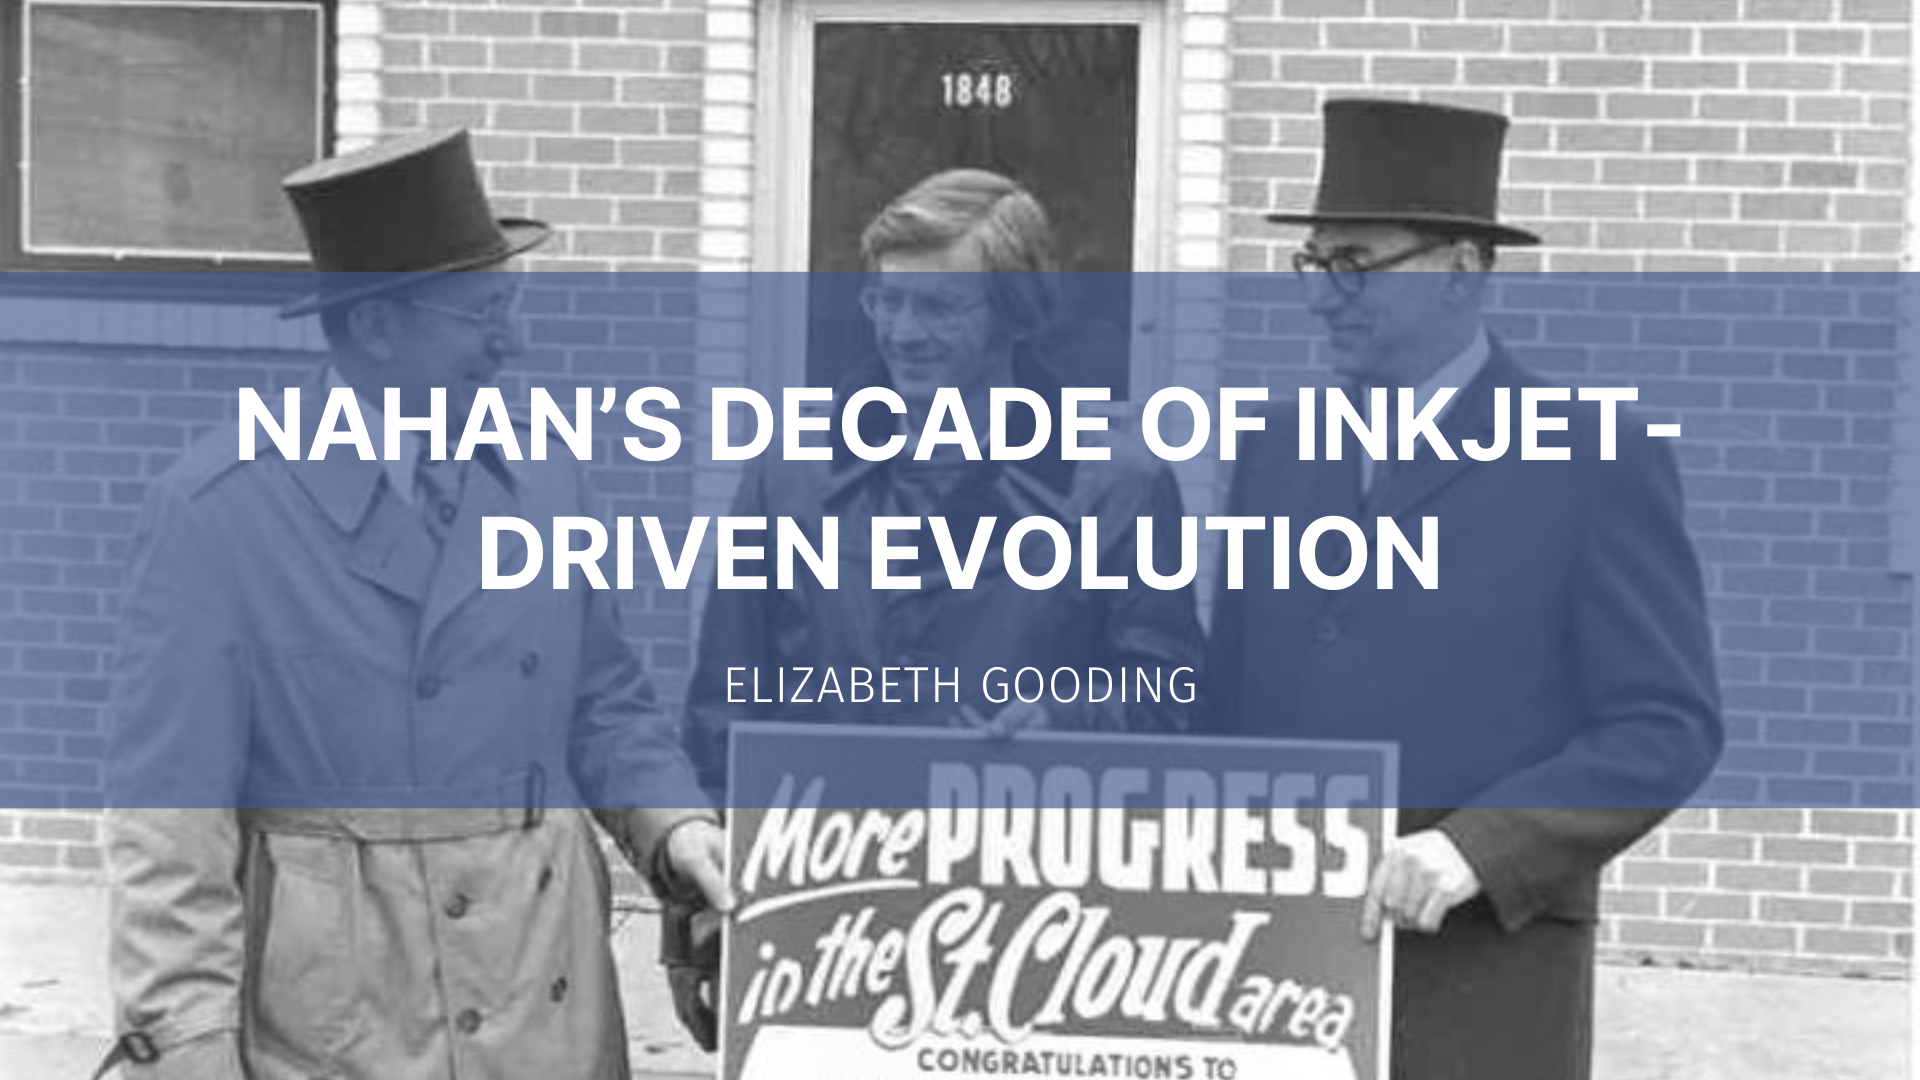 Featured image for “Nahan’s Decade of Inkjet-Driven Evolution”